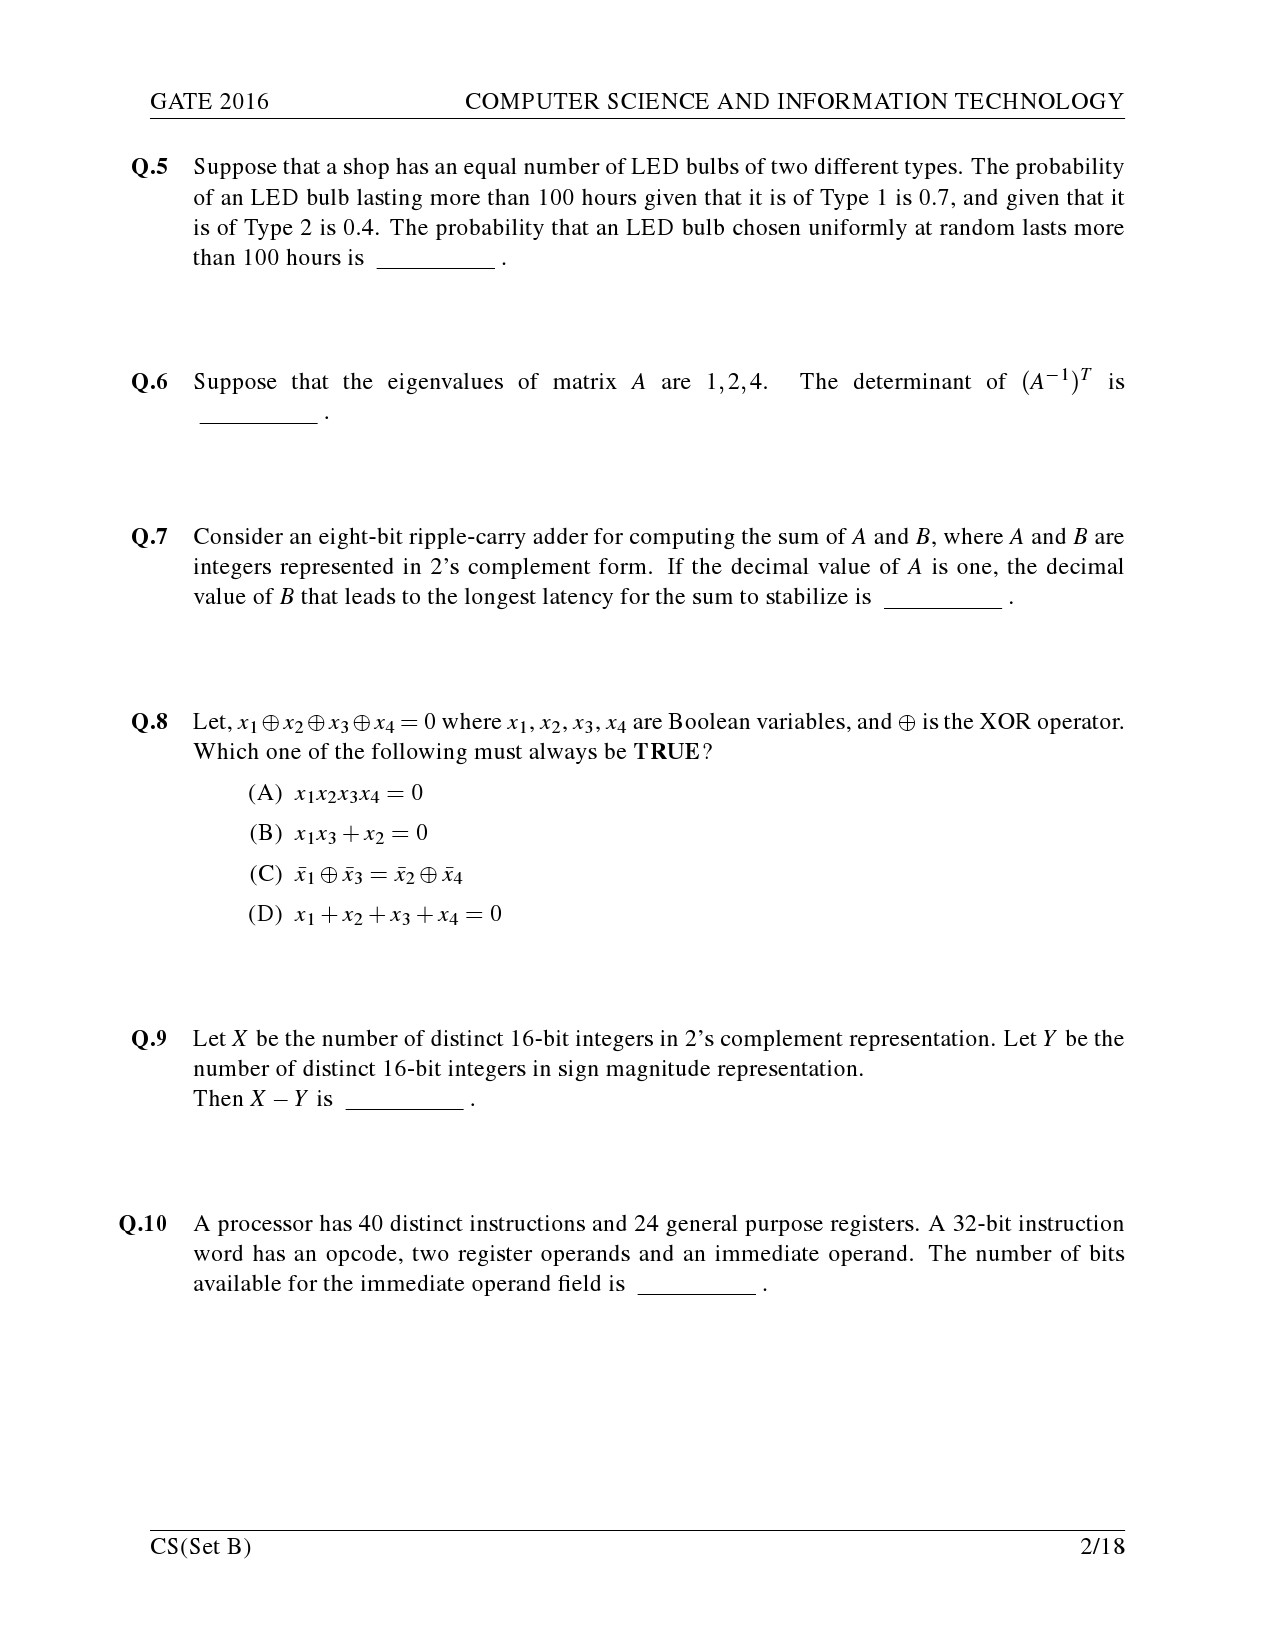 GATE Exam Question Paper 2016 Computer Science and Information Technology Set B 5